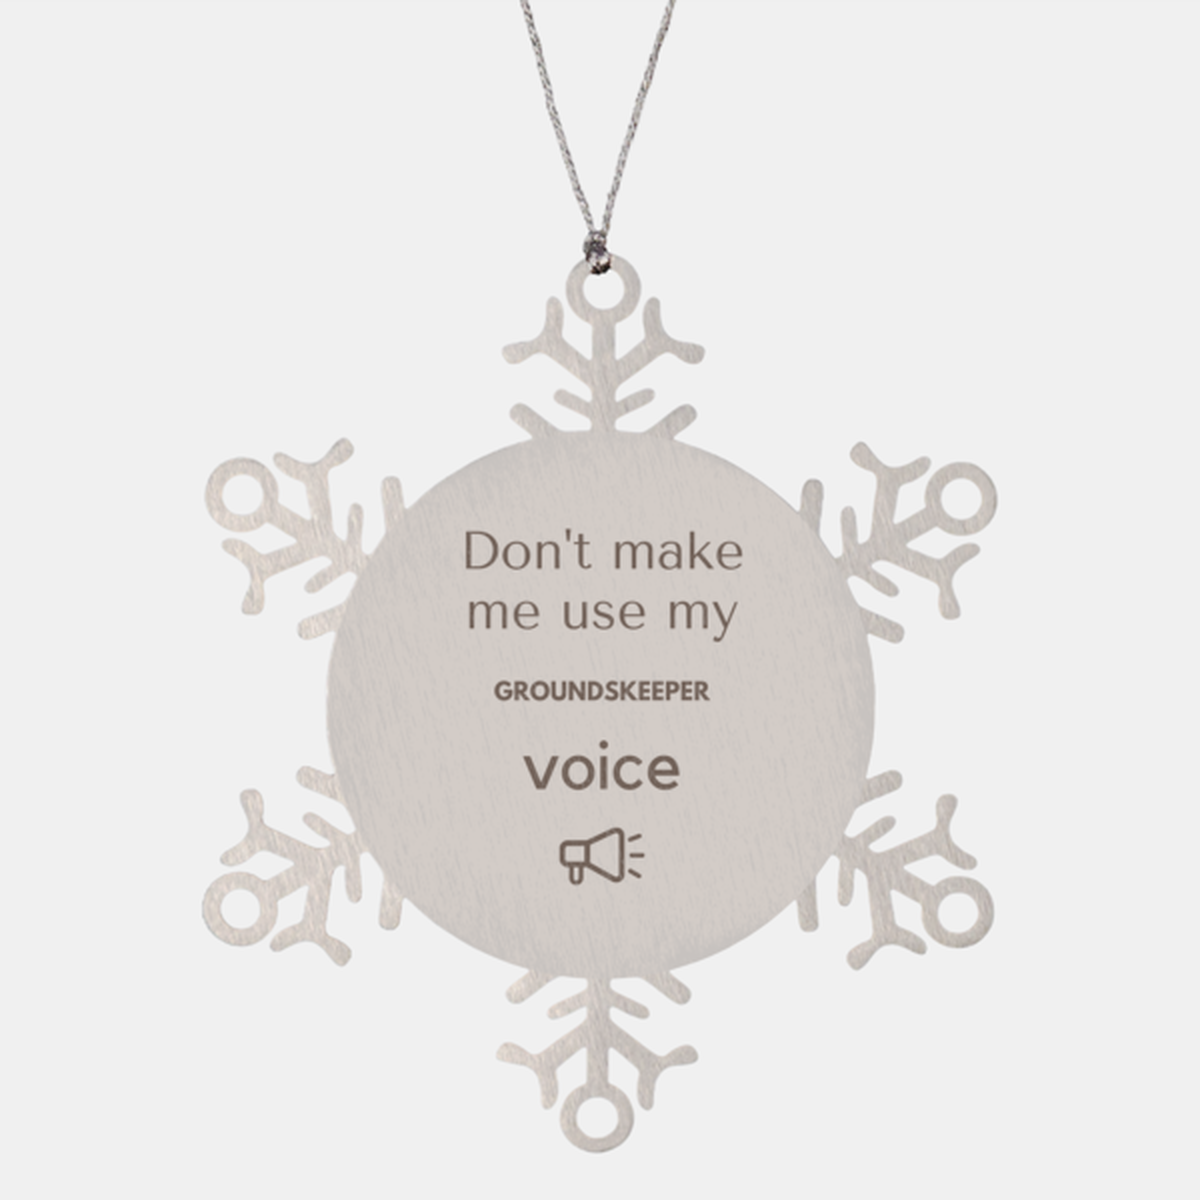 Don't make me use my Groundskeeper voice, Sarcasm Groundskeeper Ornament Gifts, Christmas Groundskeeper Snowflake Ornament Unique Gifts For Groundskeeper Coworkers, Men, Women, Colleague, Friends